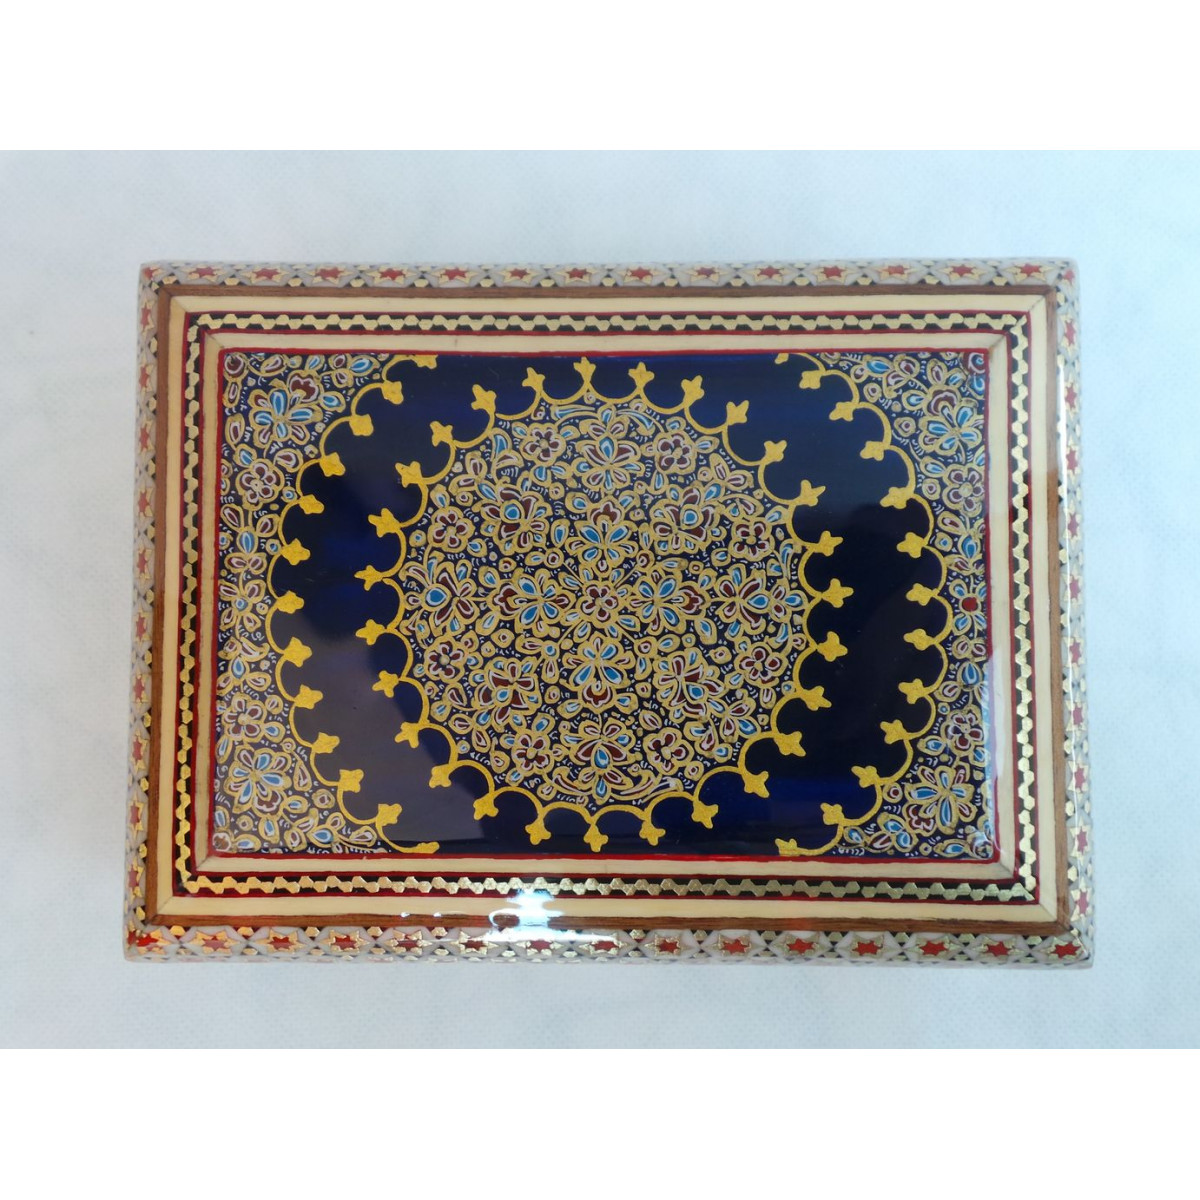 Wood and Copper Inlaying Jewelry Box - HKH3011-Persian Handicrafts